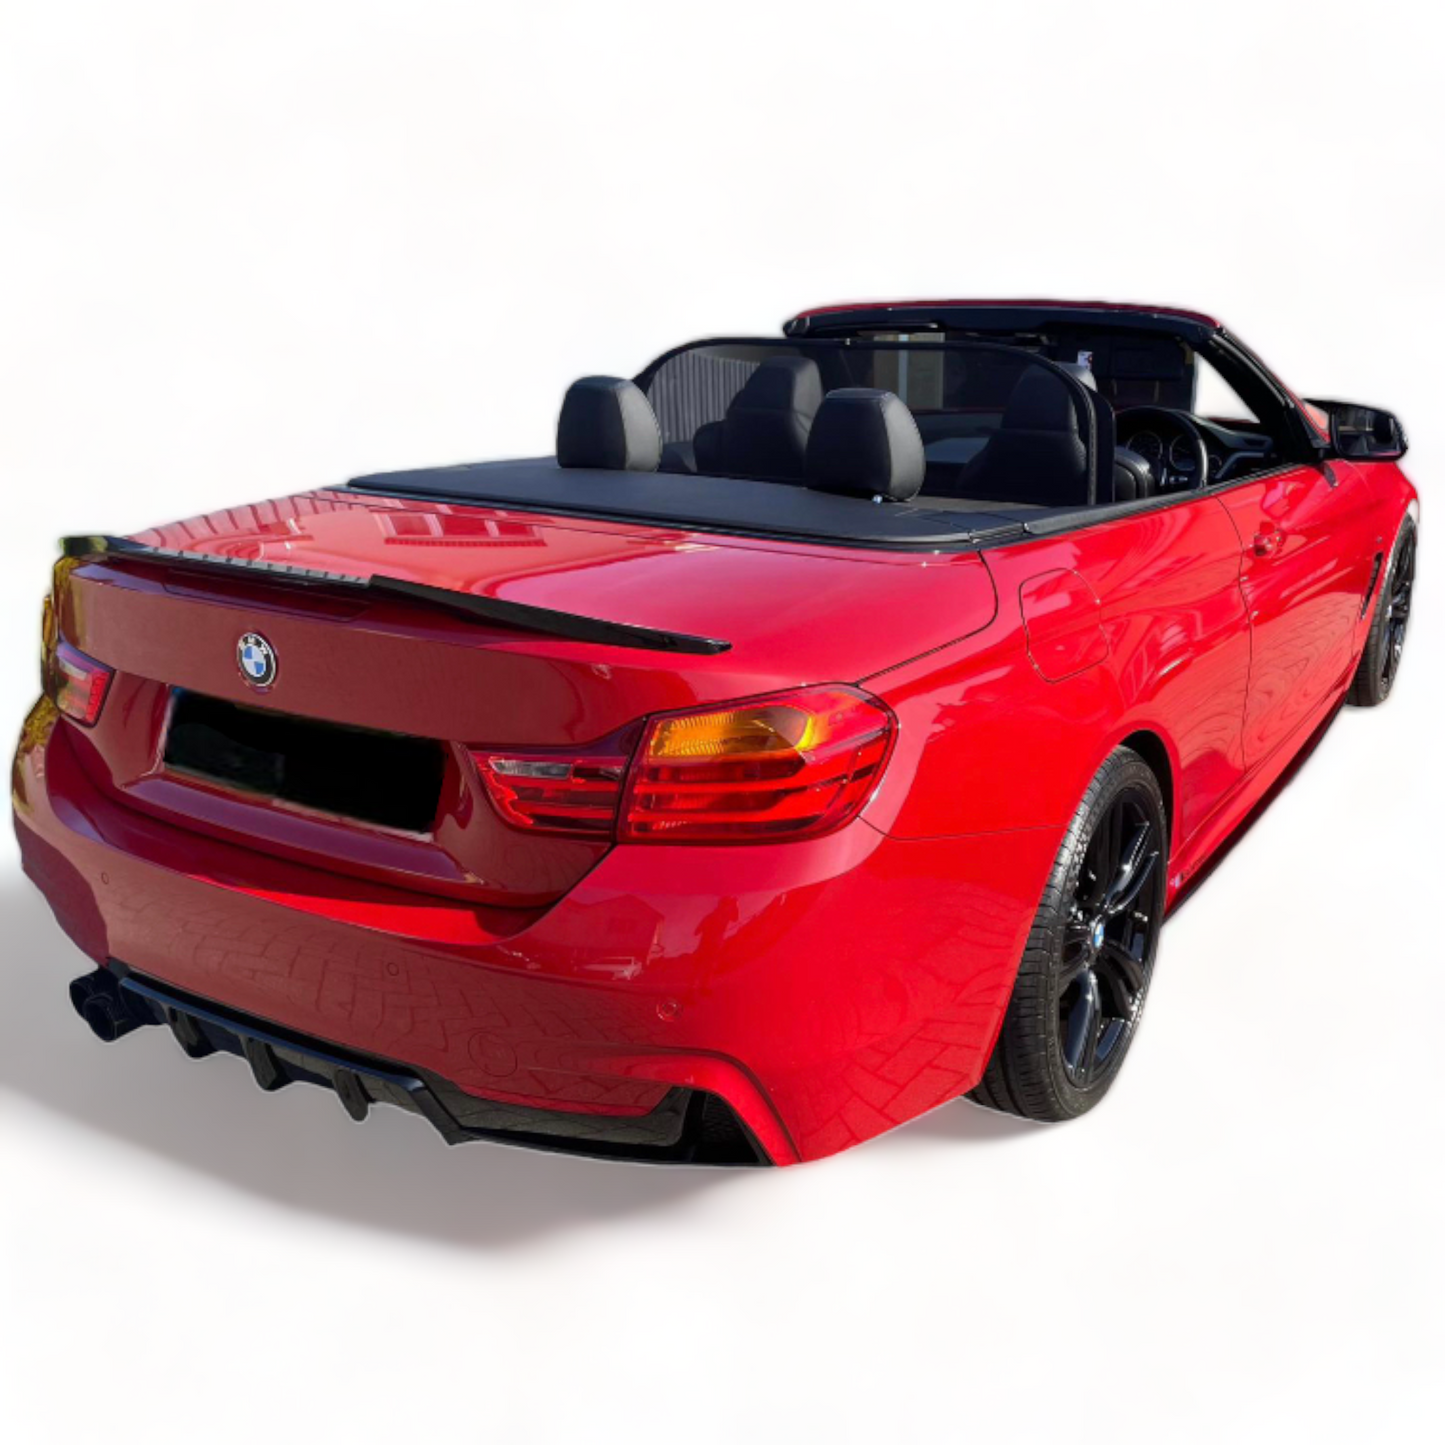 BMW F33 4 Series Convertible kit Front Splitter Diffuser Extensions Spoiler